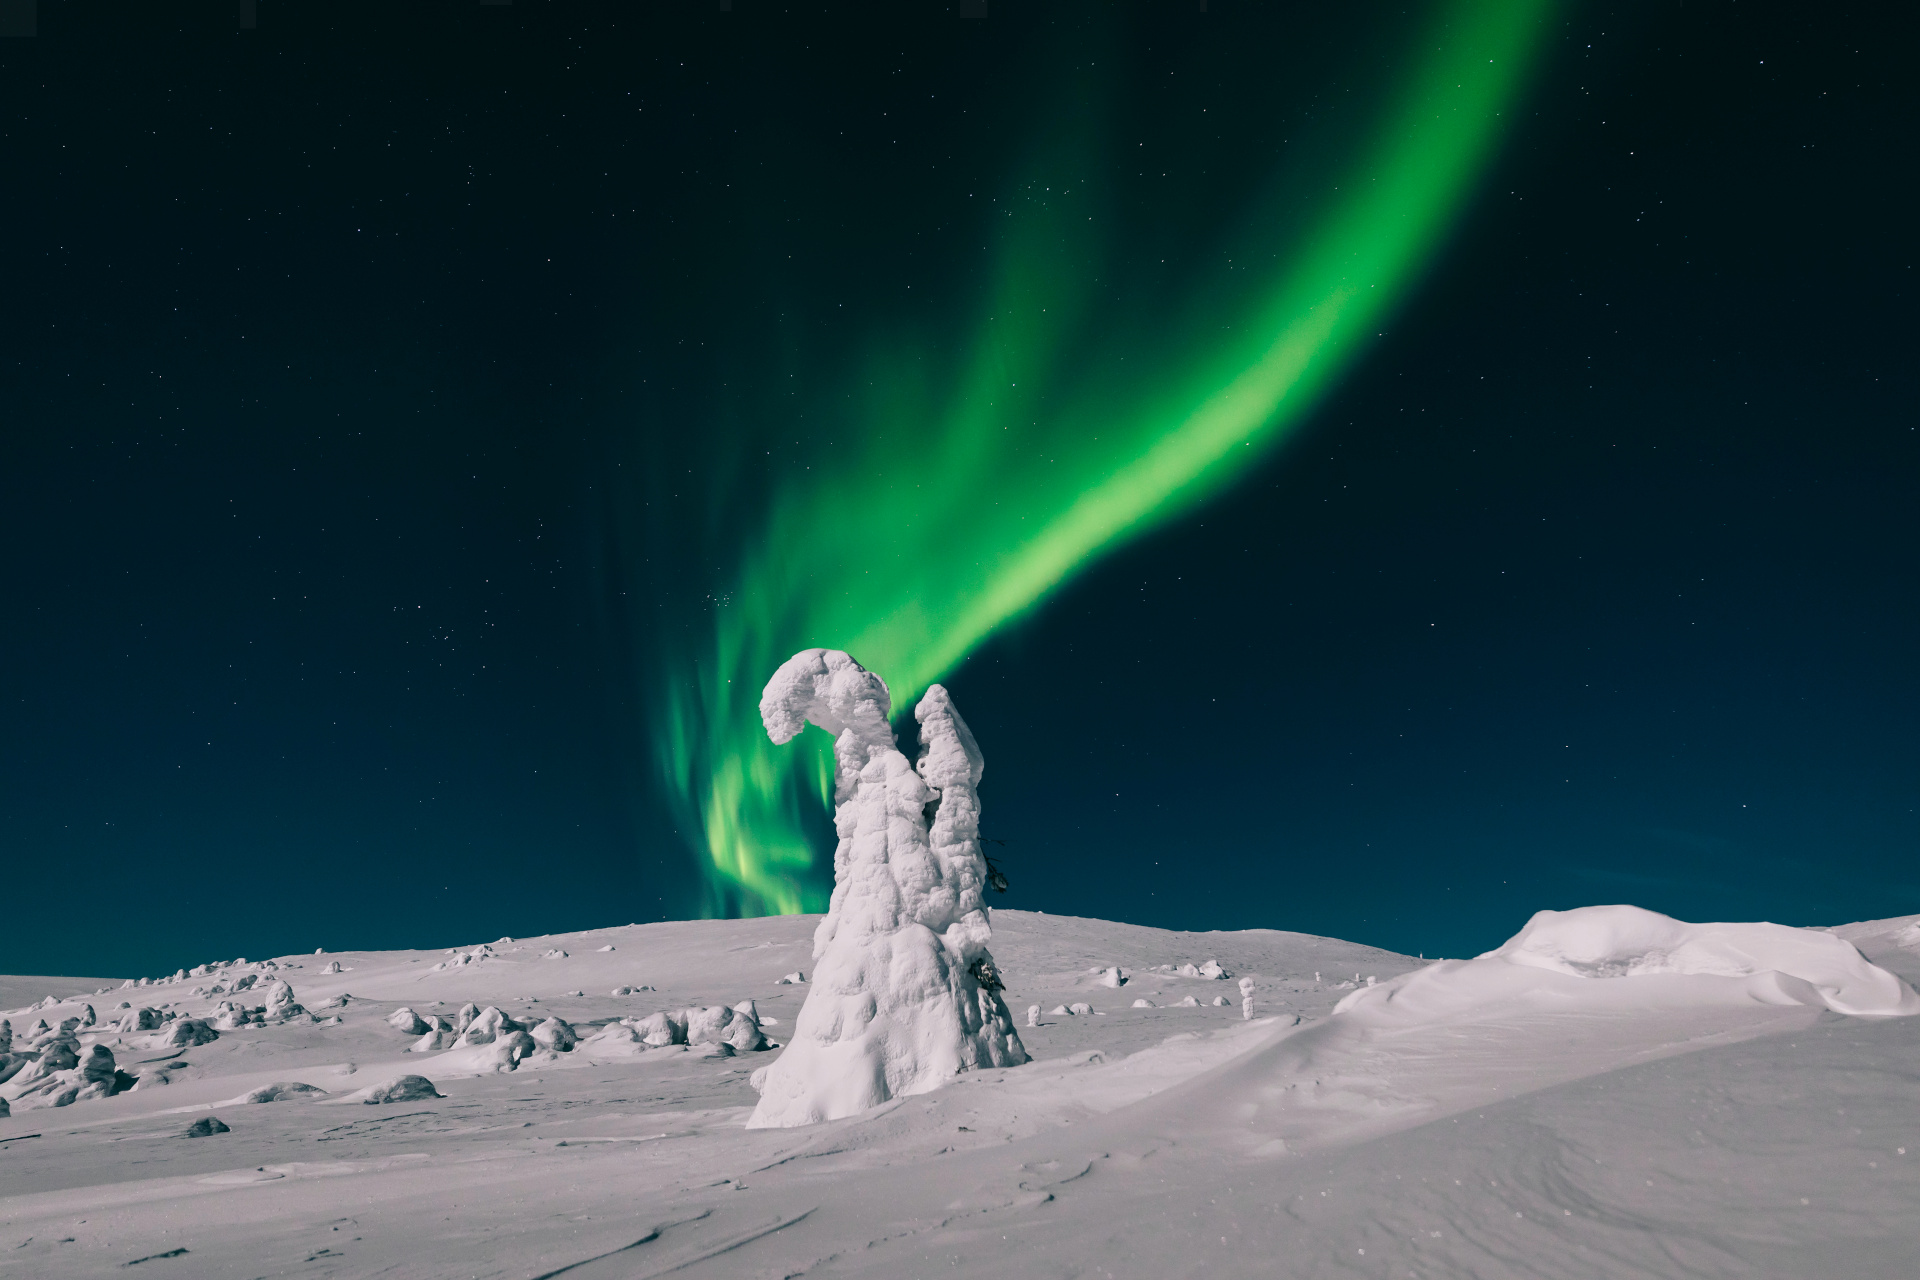 Northern Lights over a snow-crowned tree in Finnish Lapland, an Arctic holiday destination